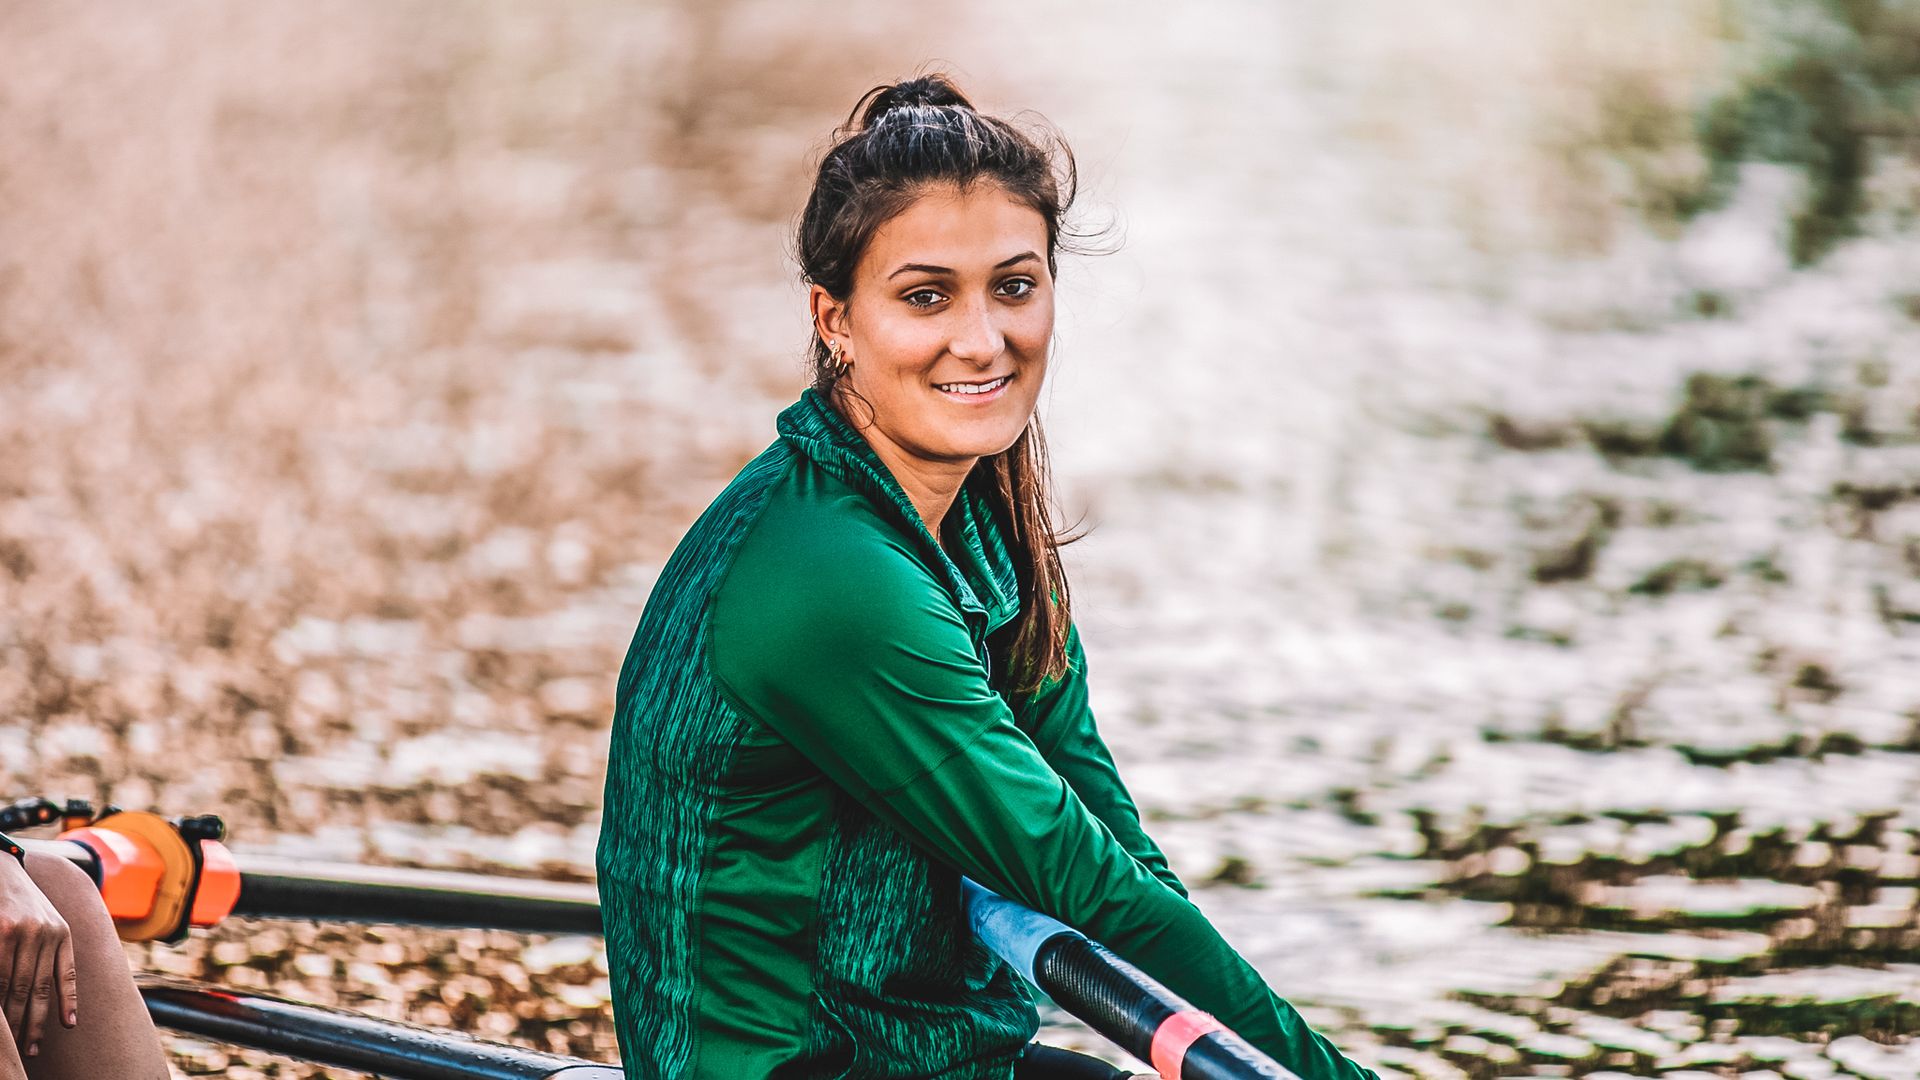 Lopez Finds Dedication Factor in Rowing